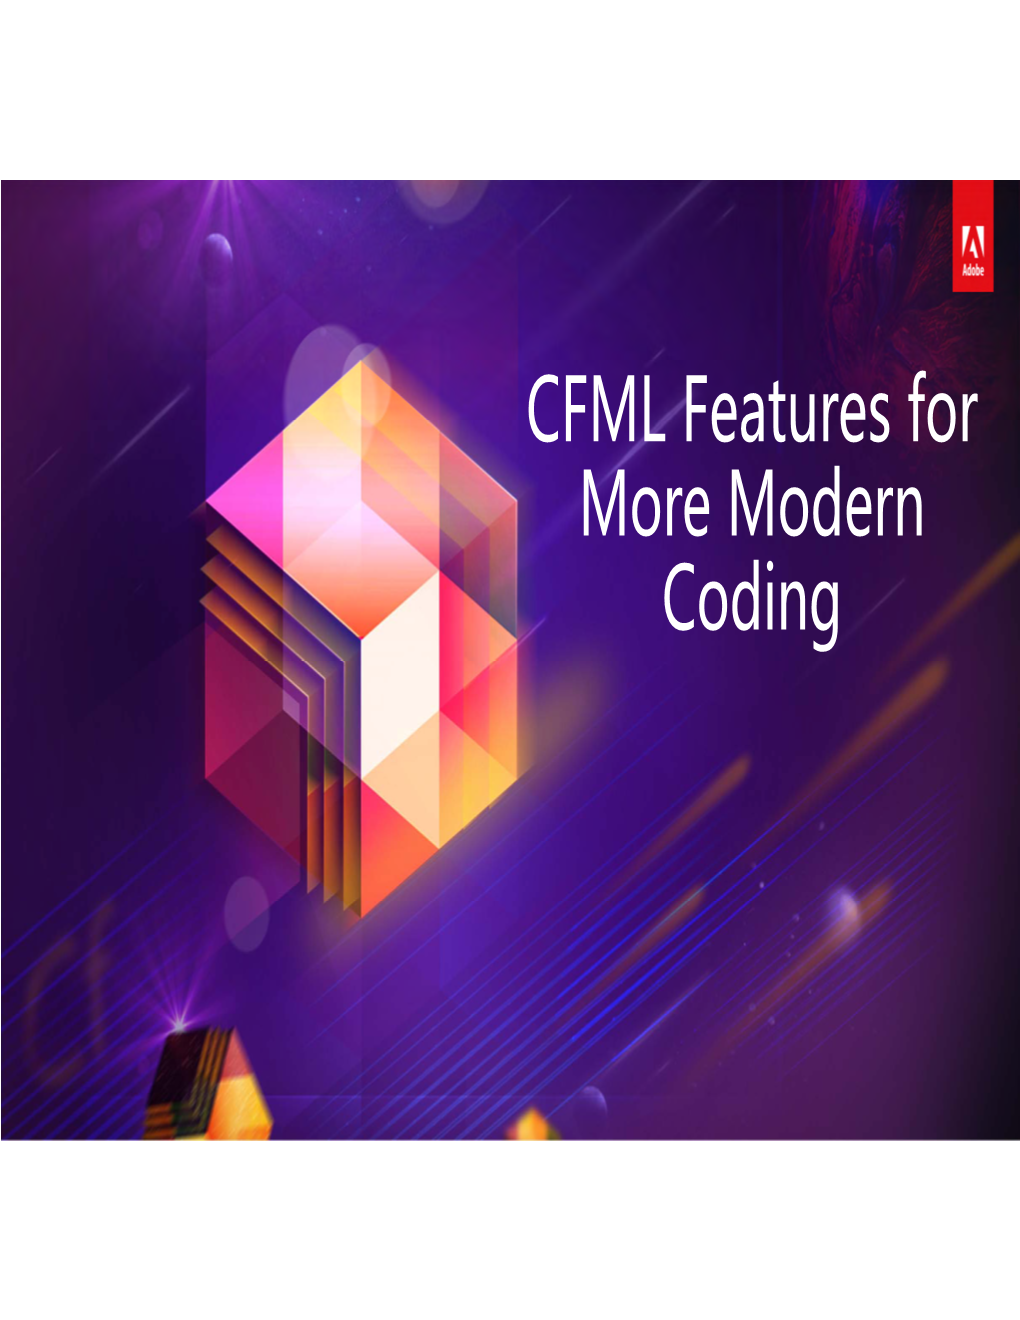 CFML Features for More Modern Coding CFML Features for More Modern Coding